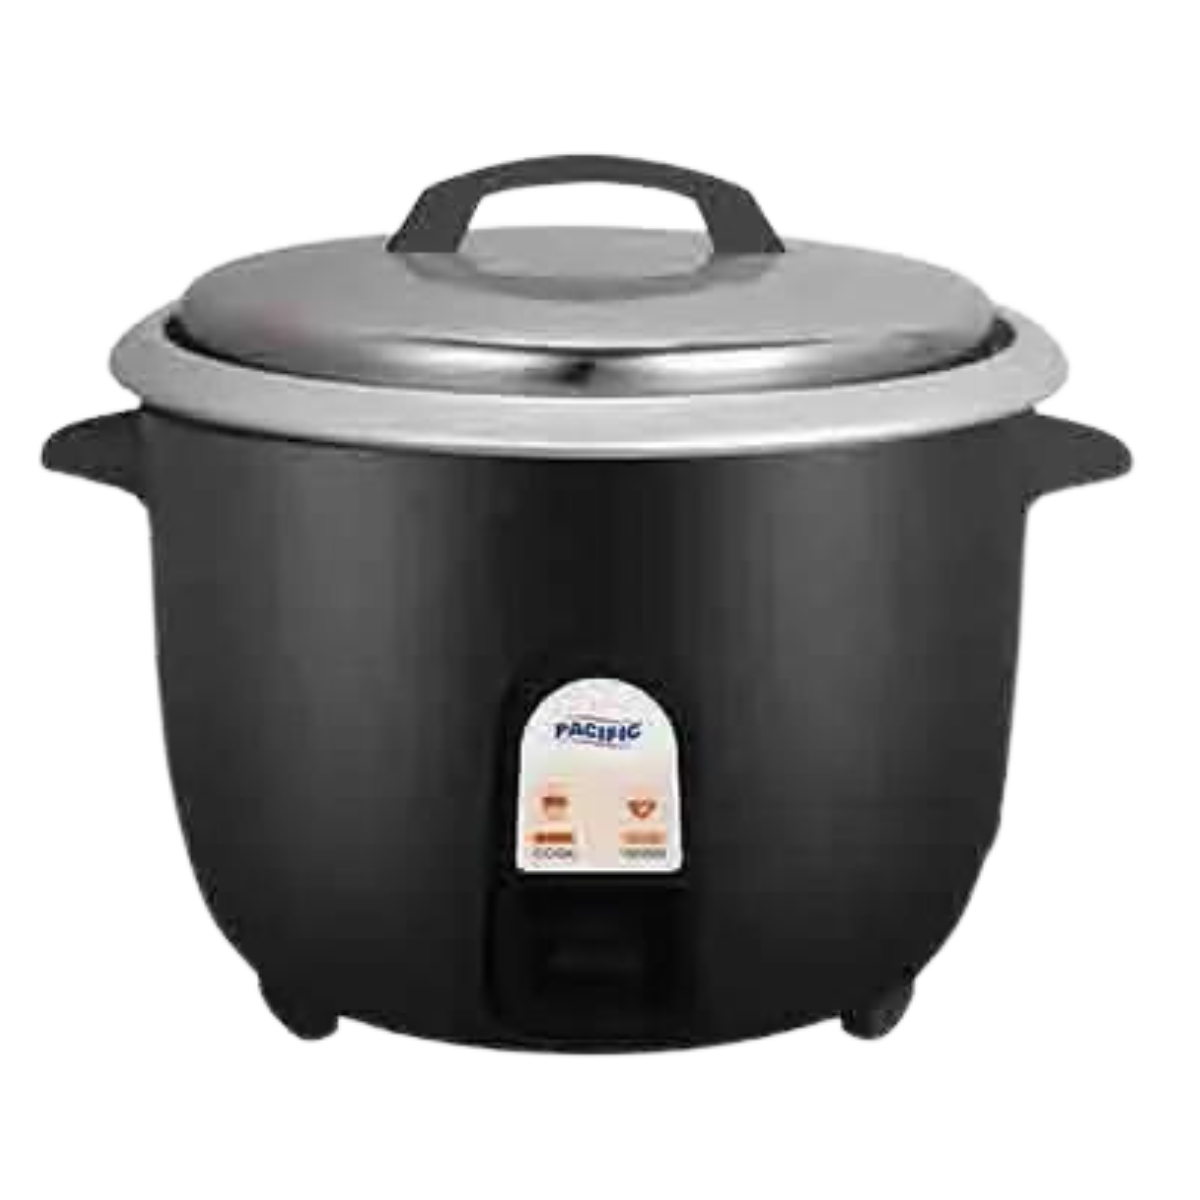 PACIFIC PCK800 RICE COOKER 4.2L